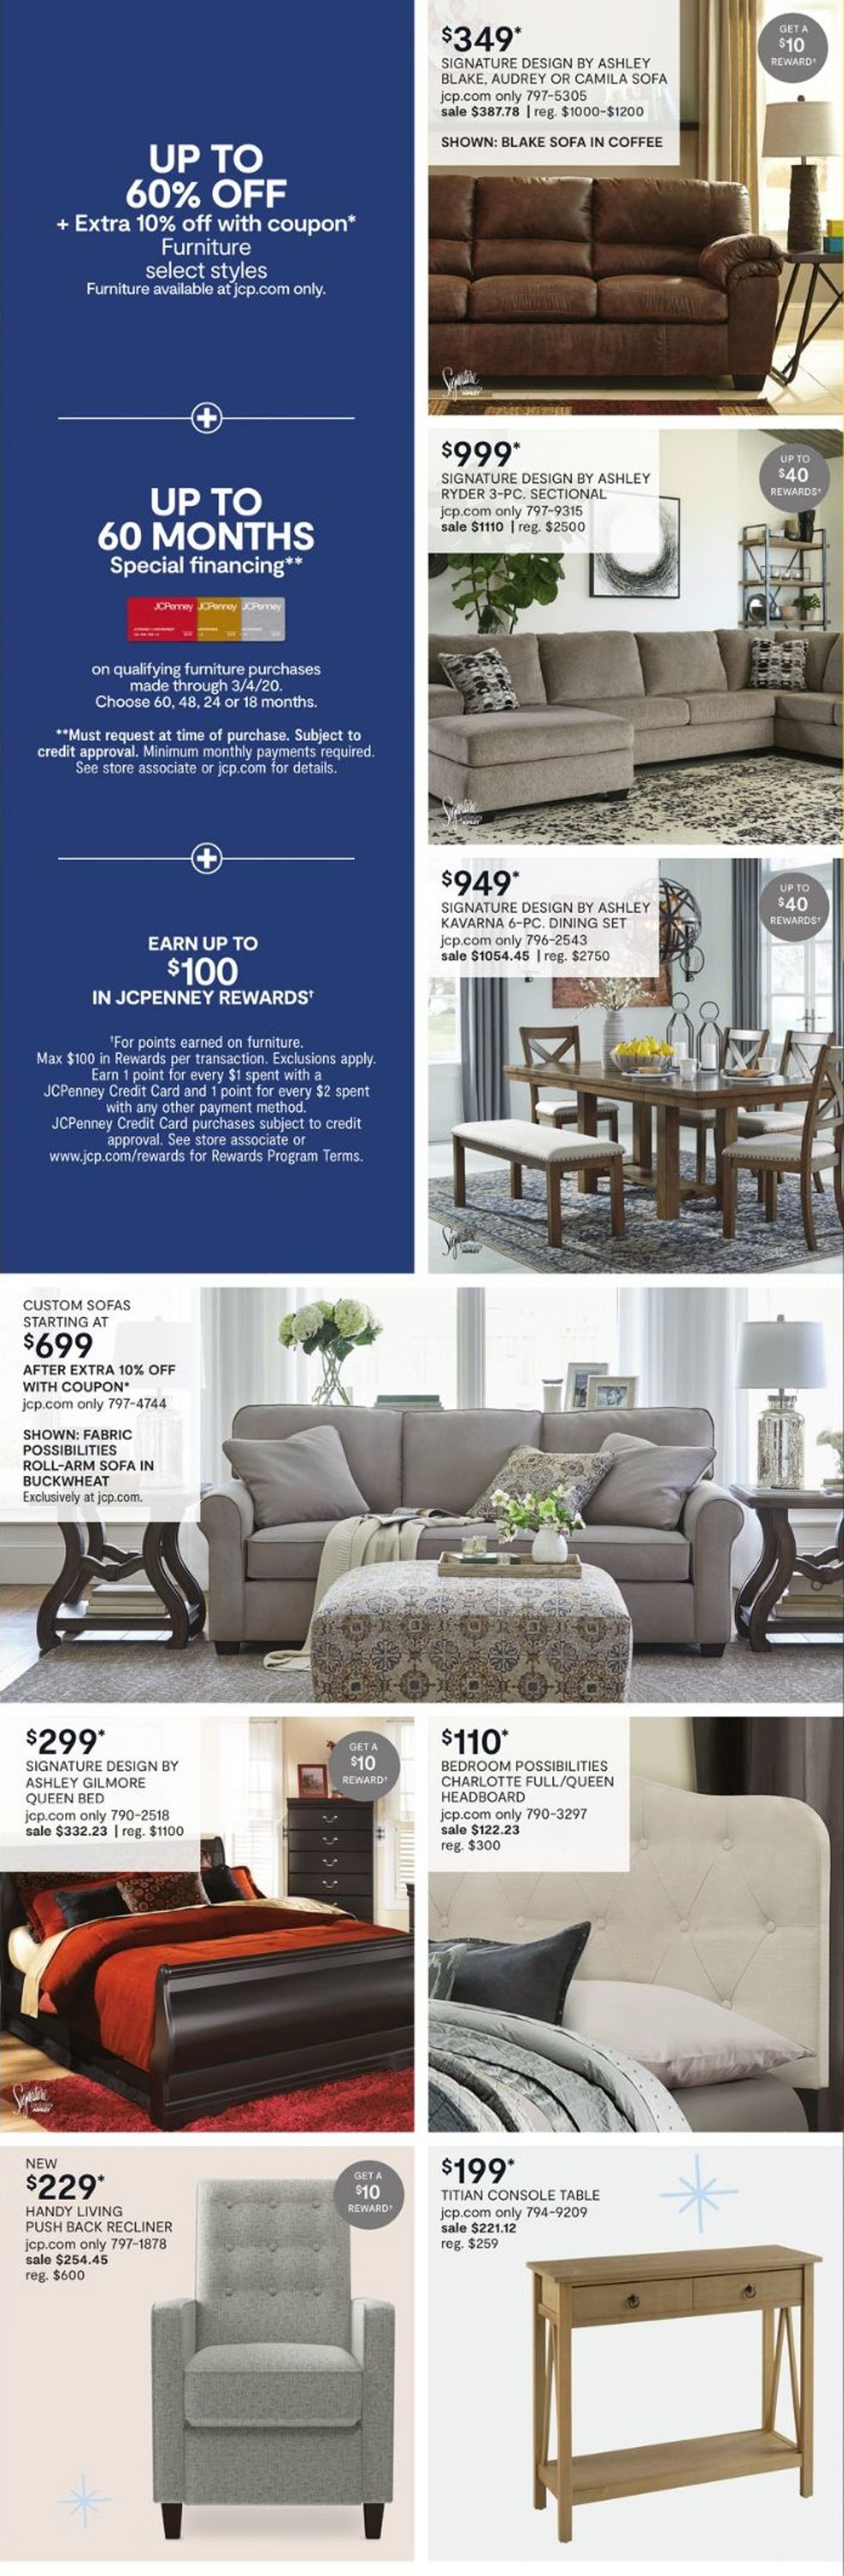 JCPenney Current Weekly Ad 02 18 02 19 2020 6 Frequent Adscom